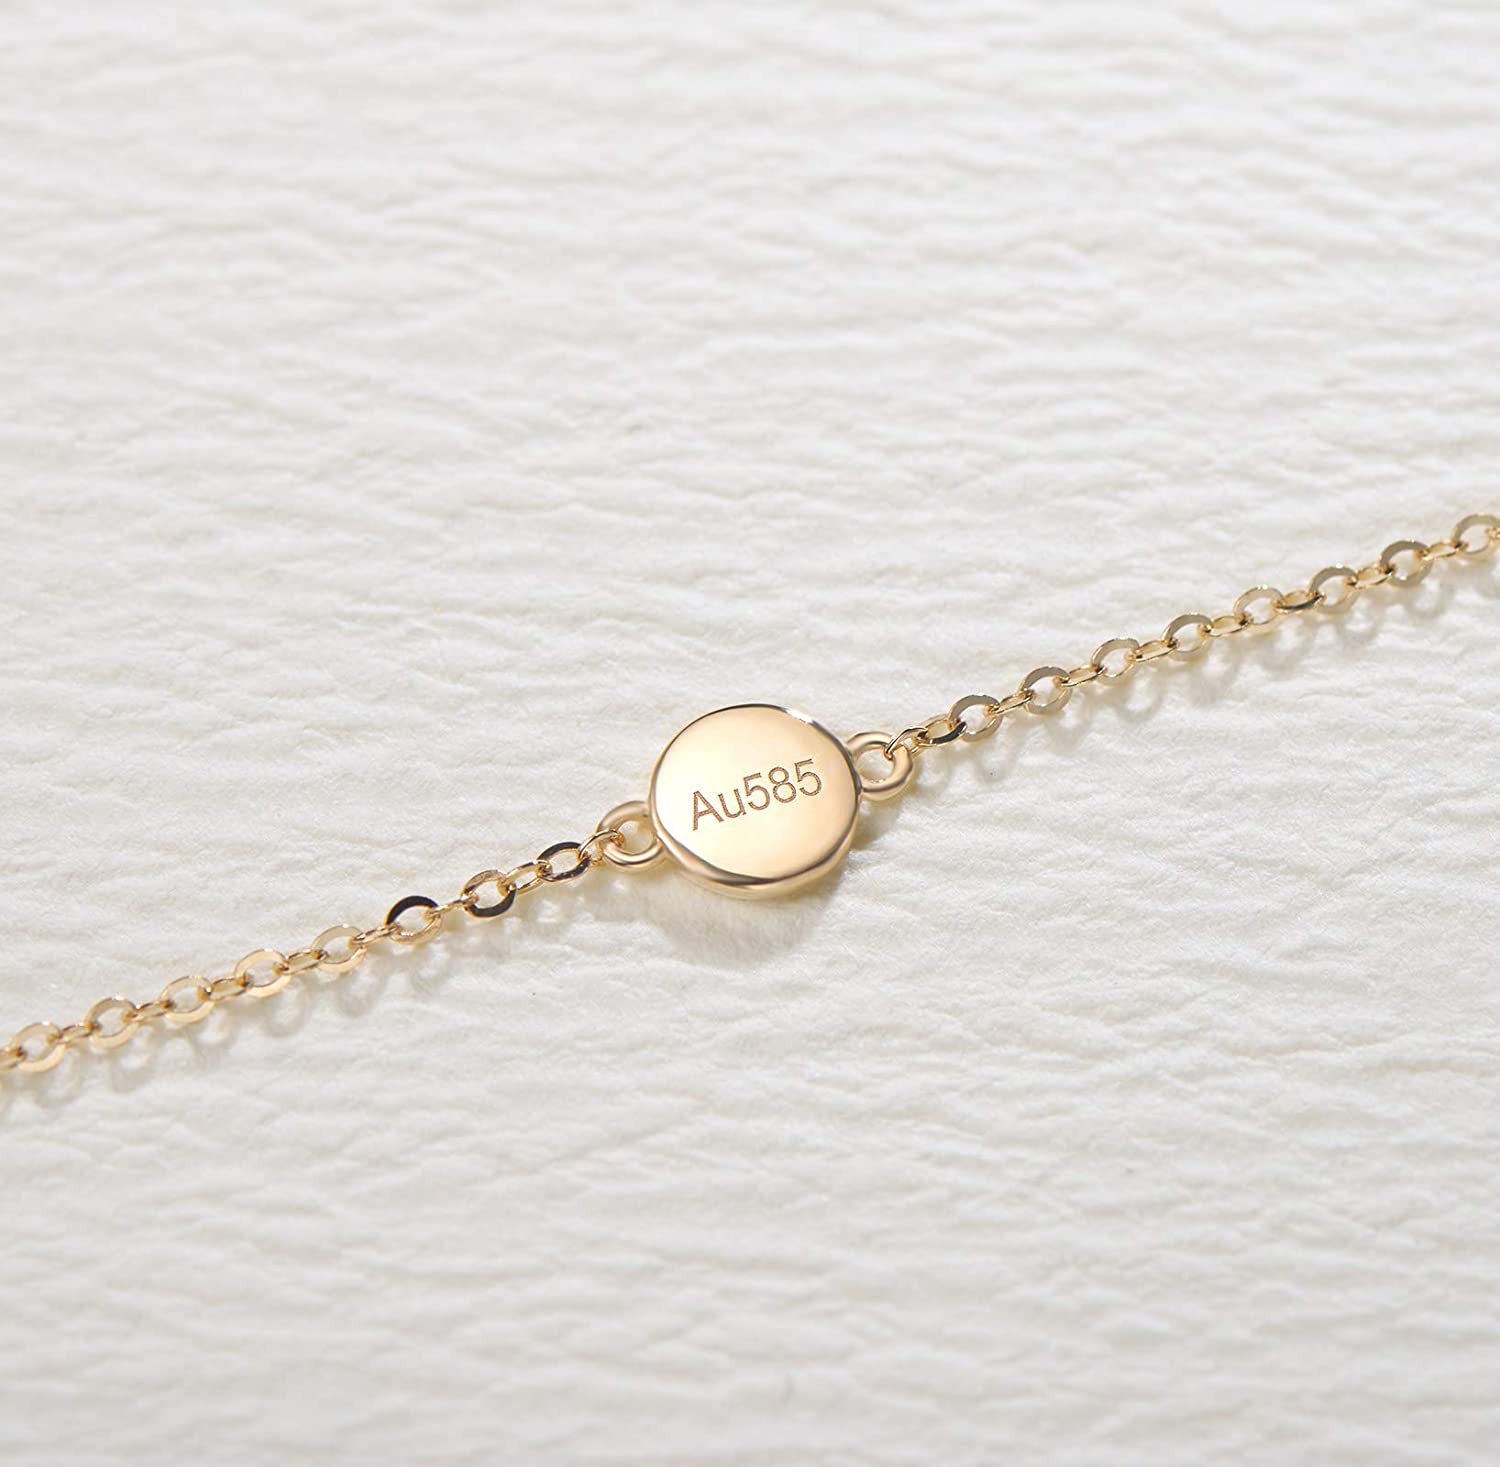 FANCIME "LOVE" 14k Solid Yellow Gold  Round Coin Bracelet Coin